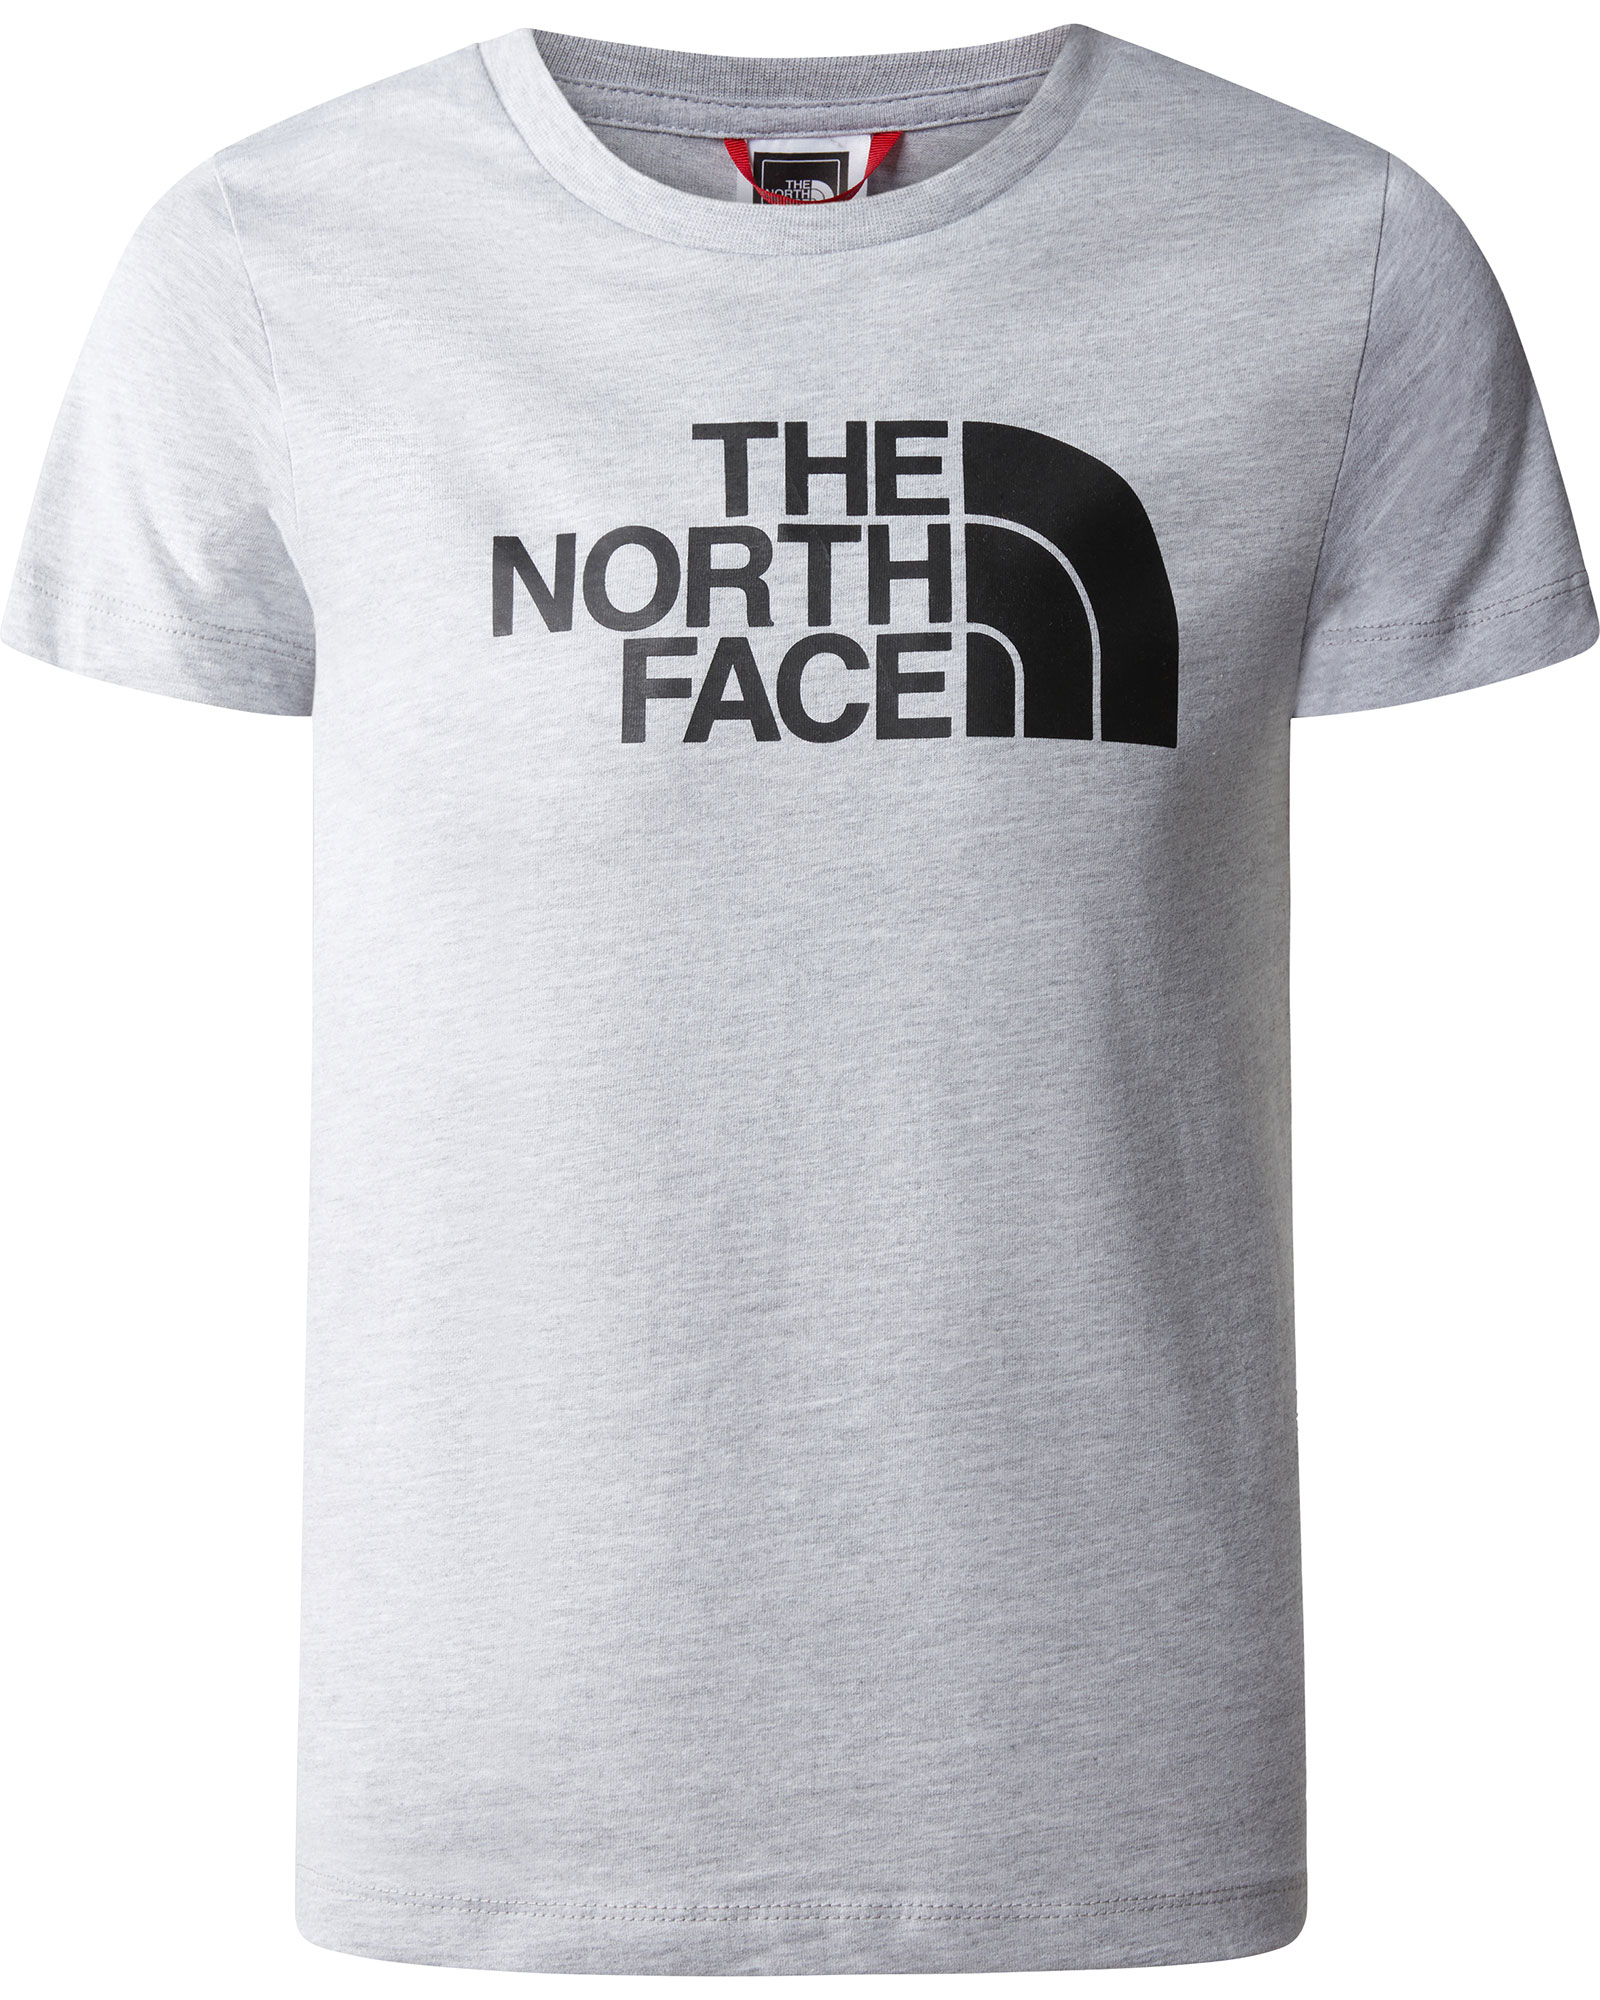 The North Face Boy’s Easy T Shirt - Light Grey Heather S